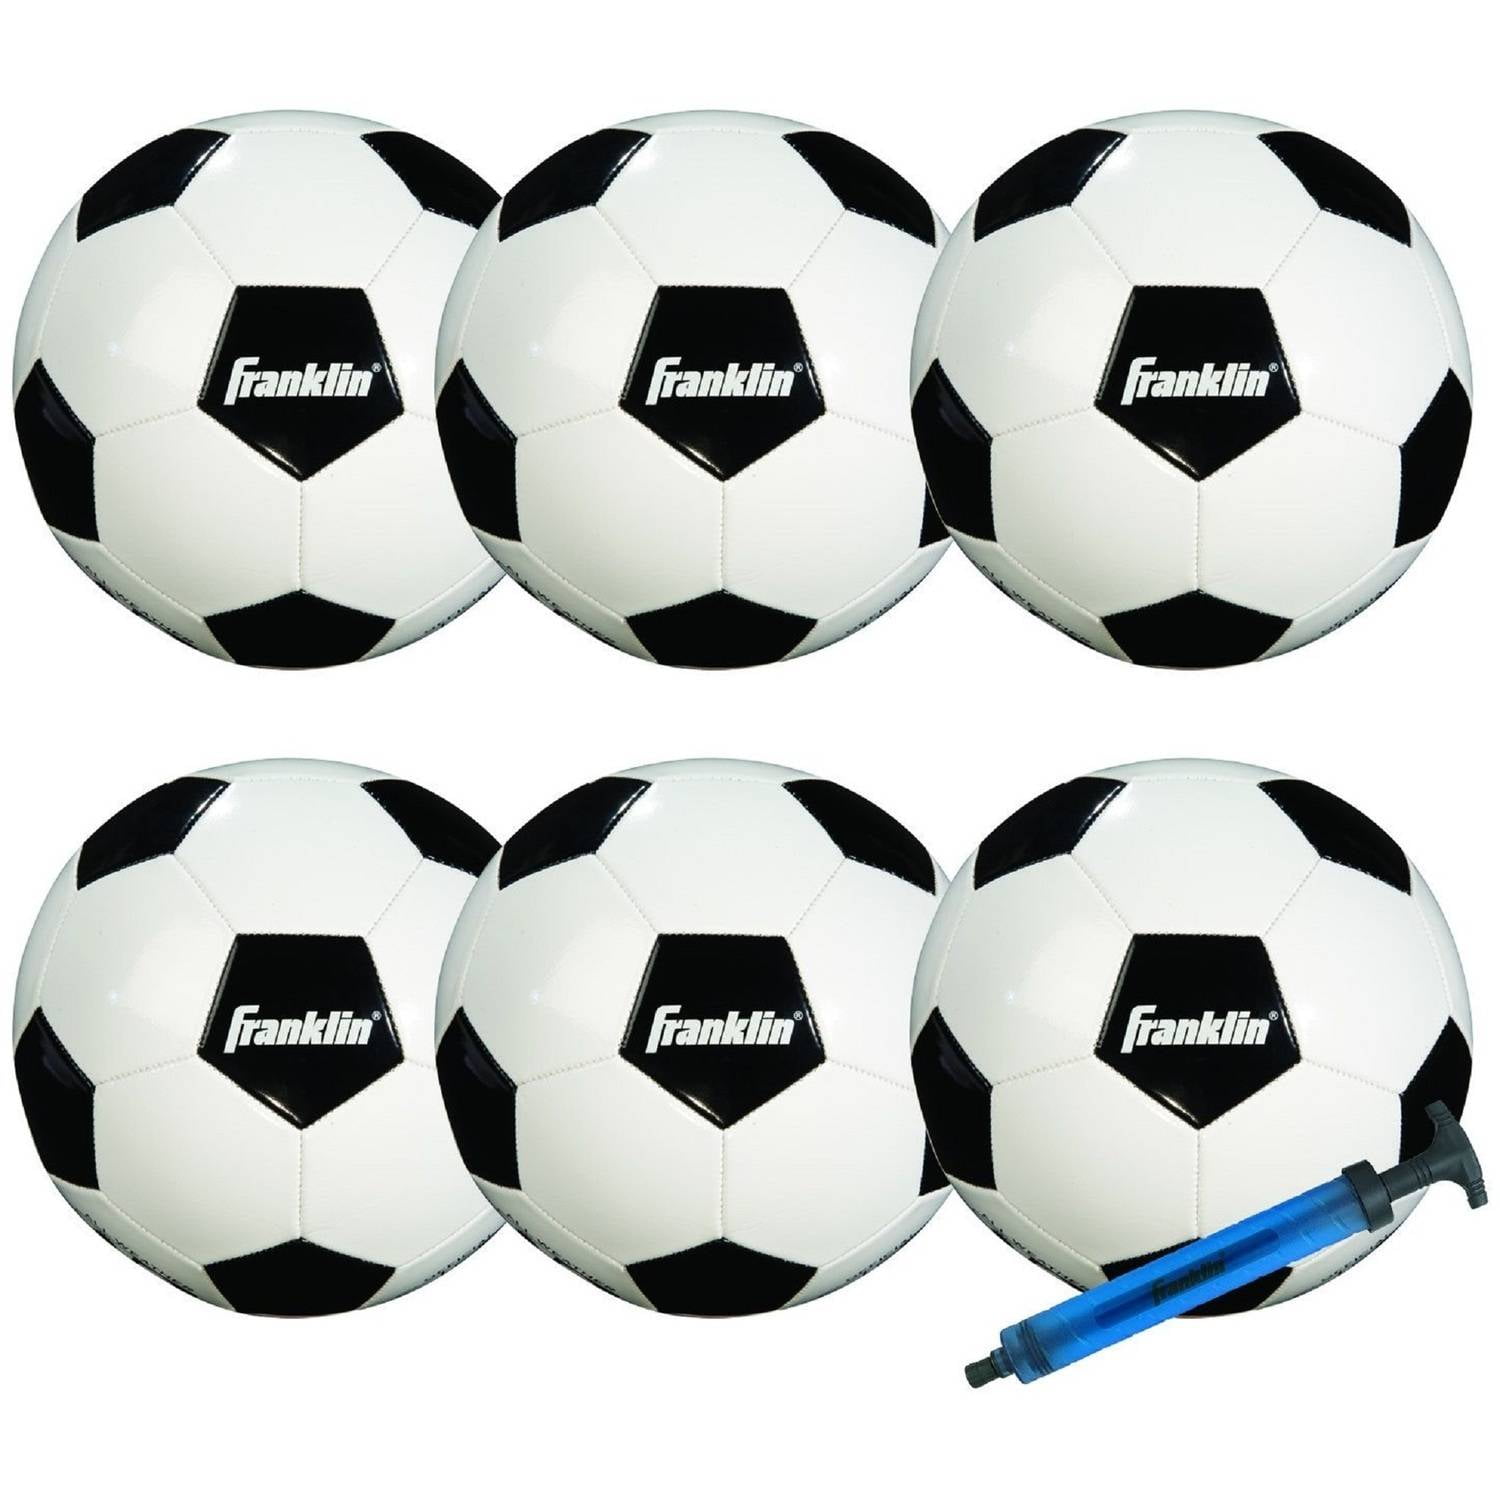 STAR Soccer ball Action Plus SIZE 5 